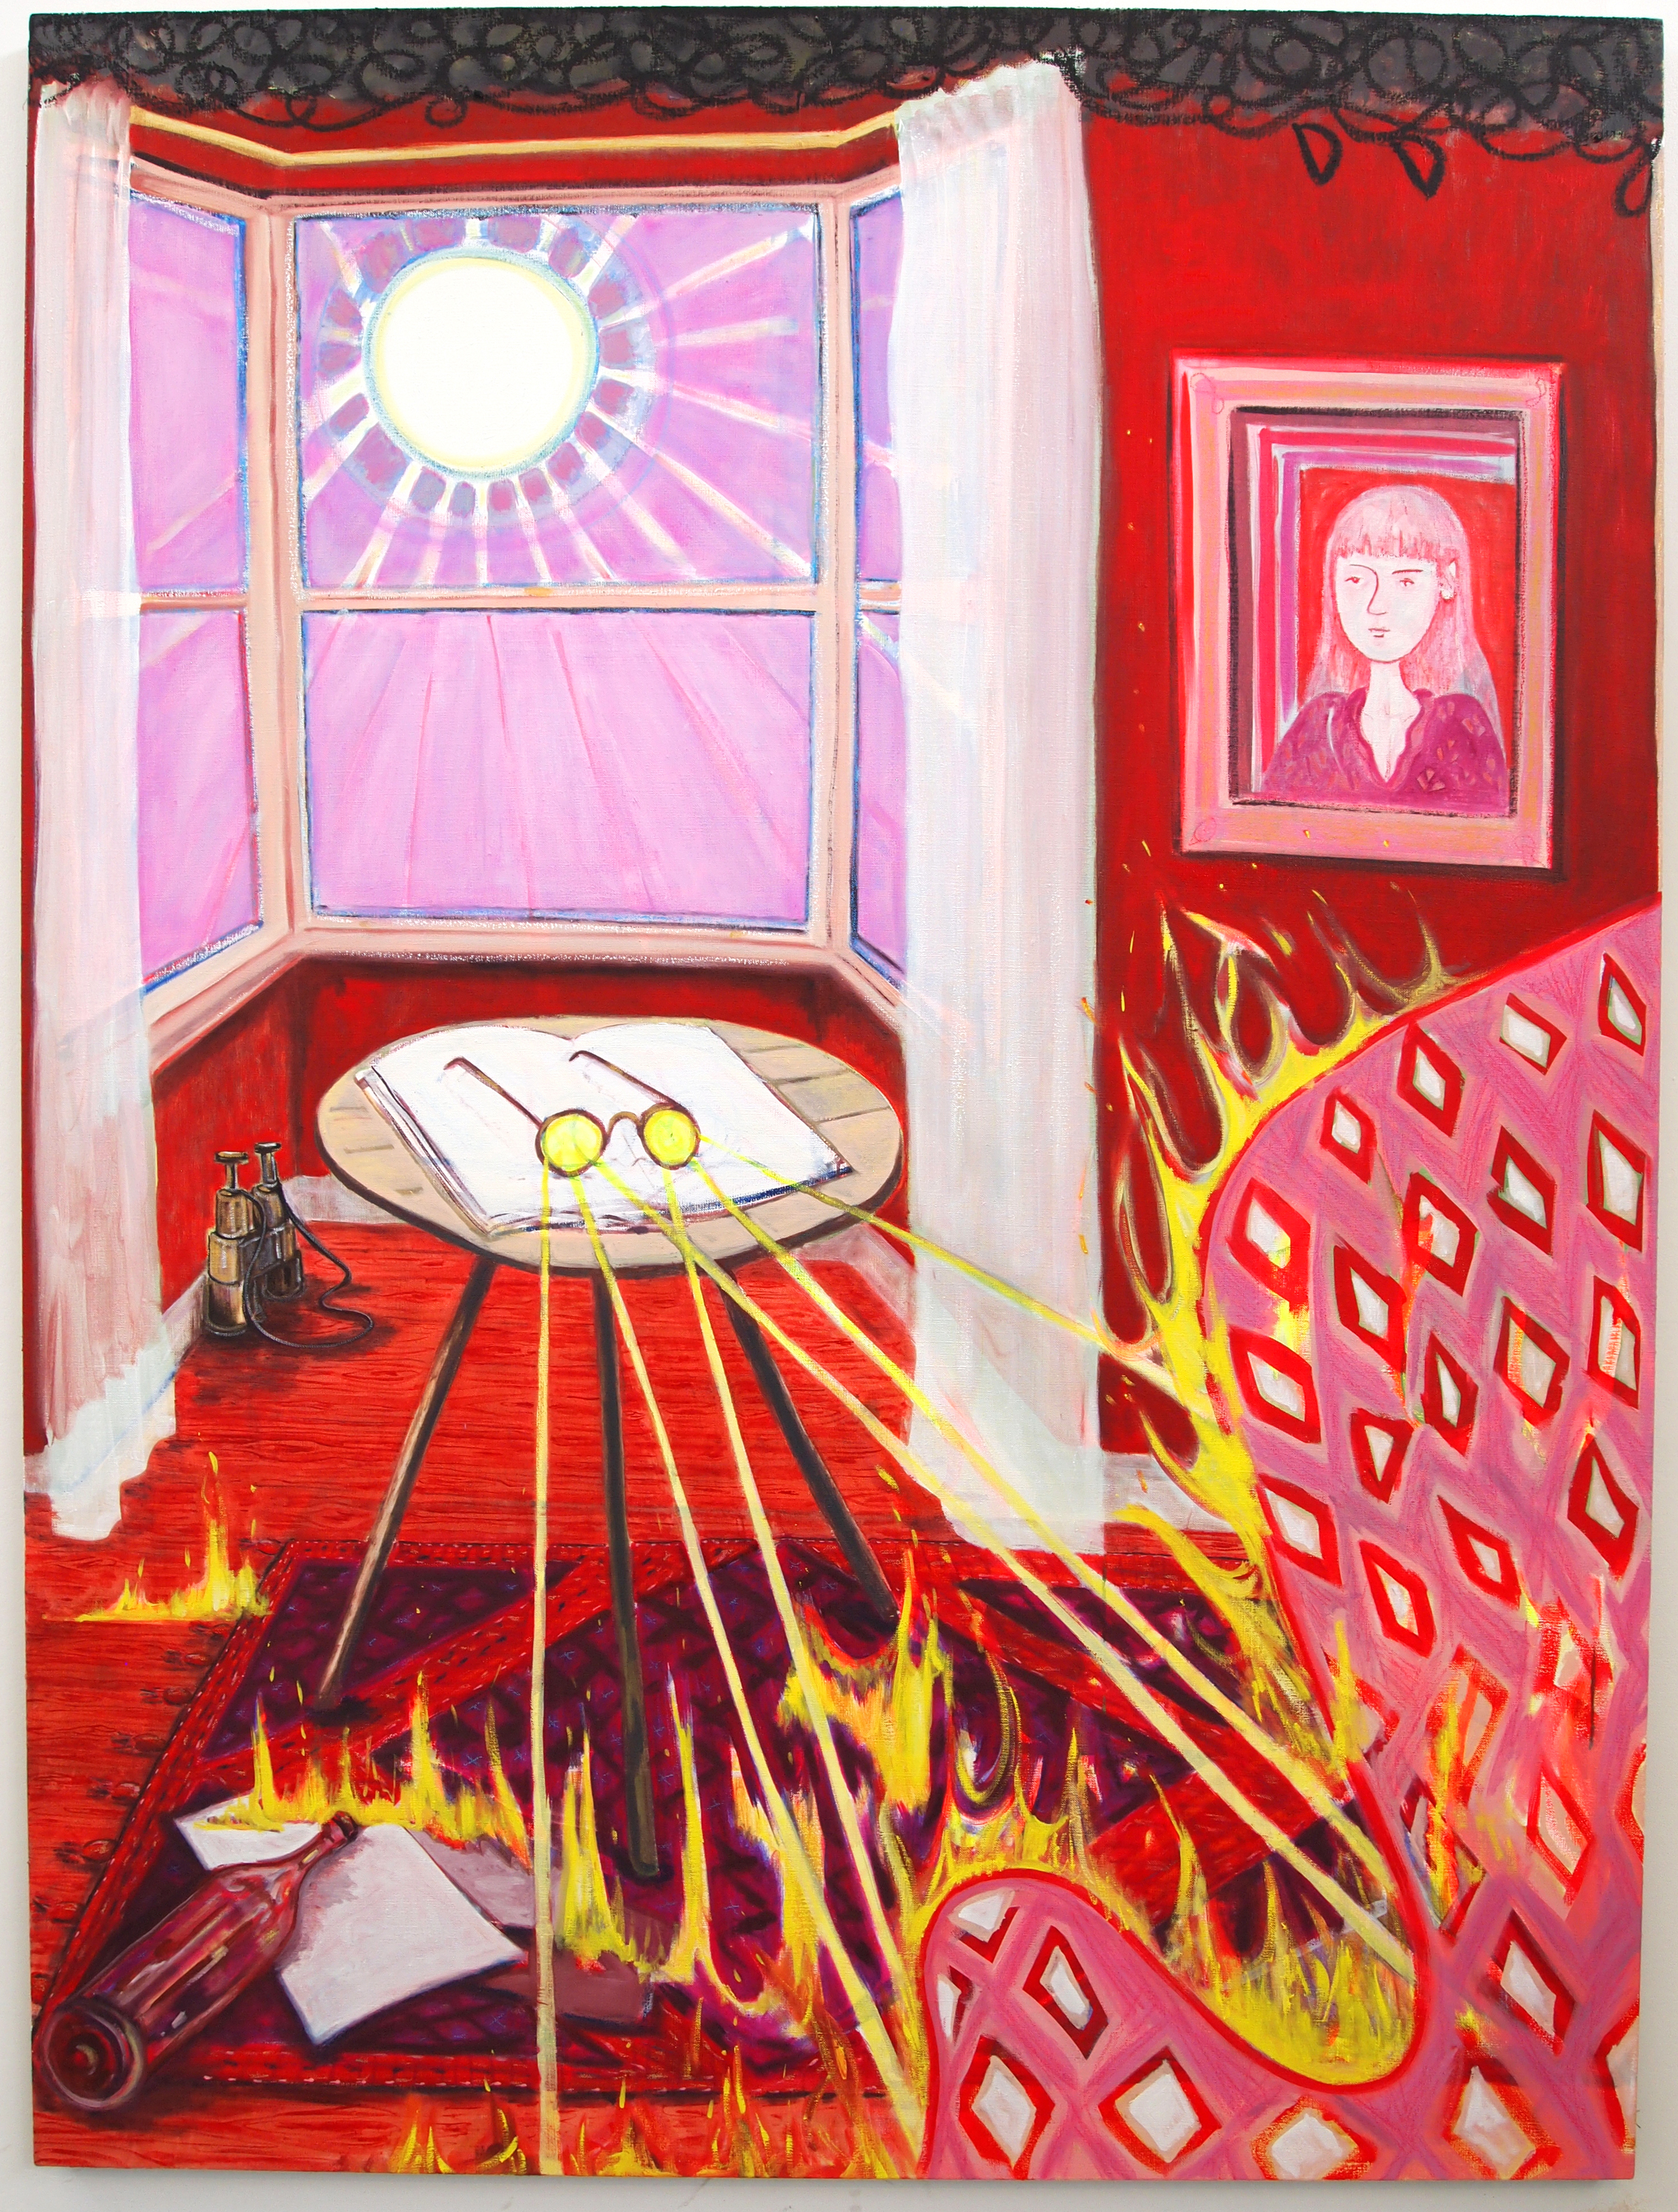  Sun in a Red Room  Oil on Flax  200 x 150 cm  2015 